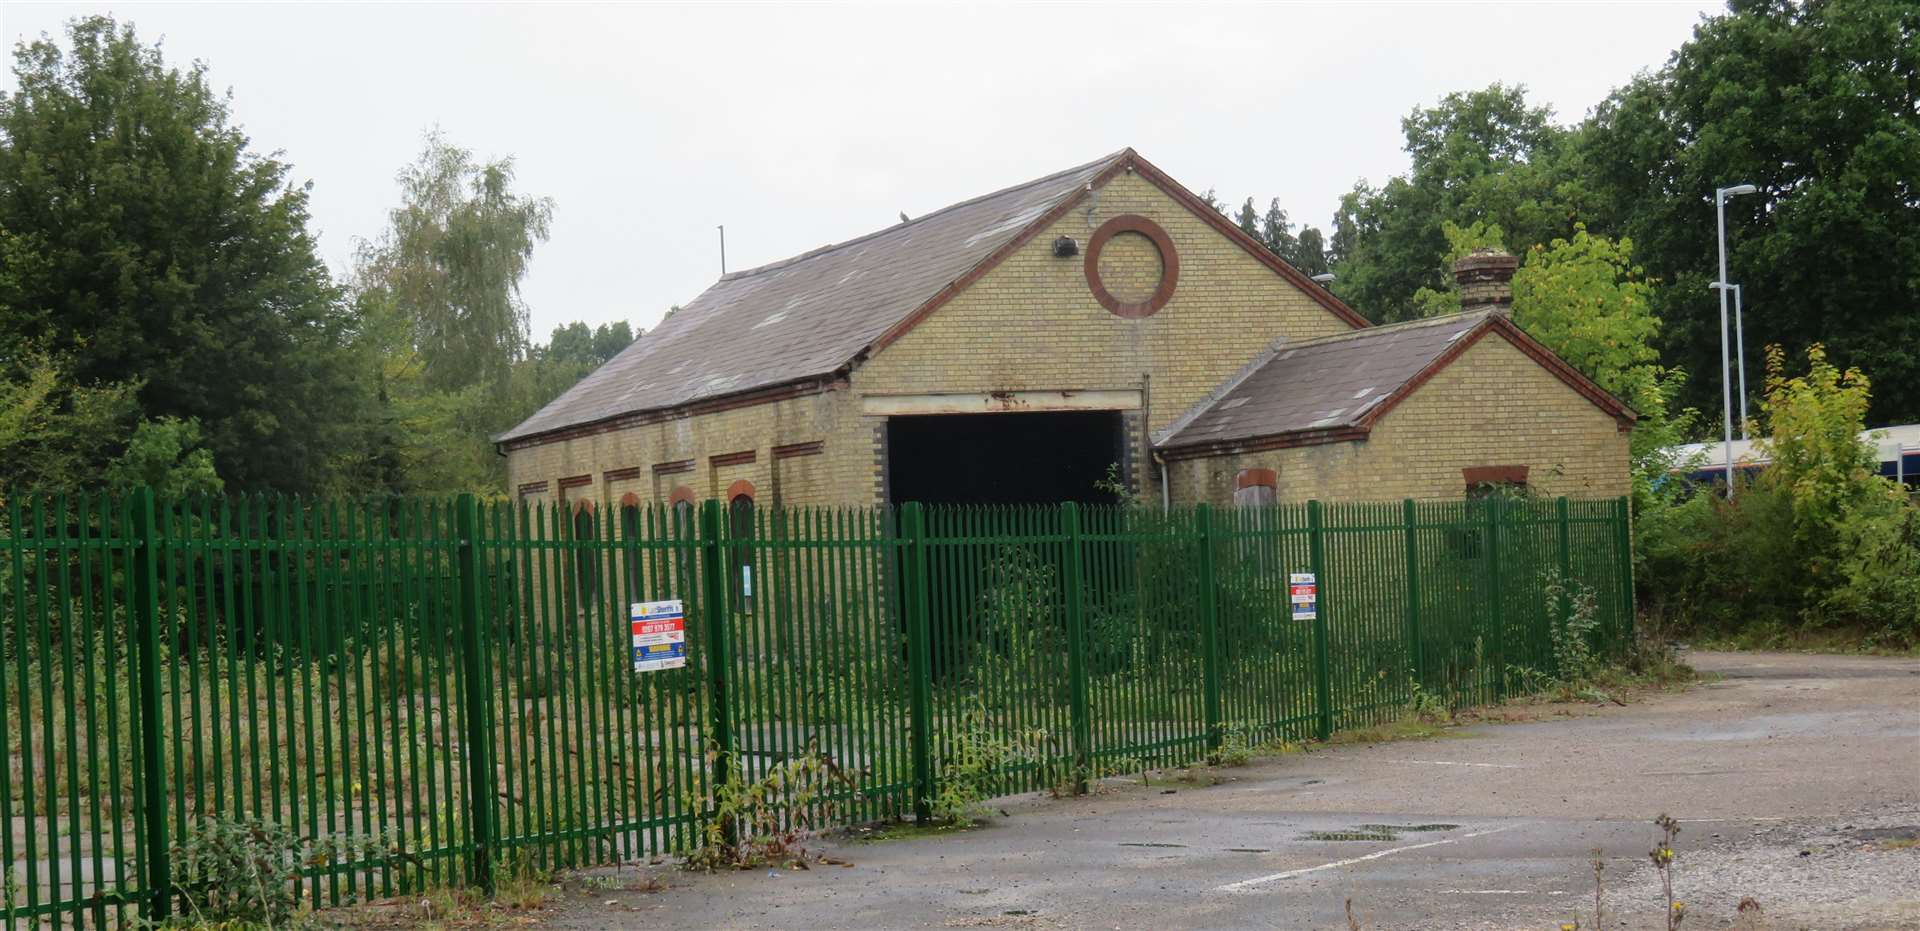 The disused Good Shed in Bearsted could be converted